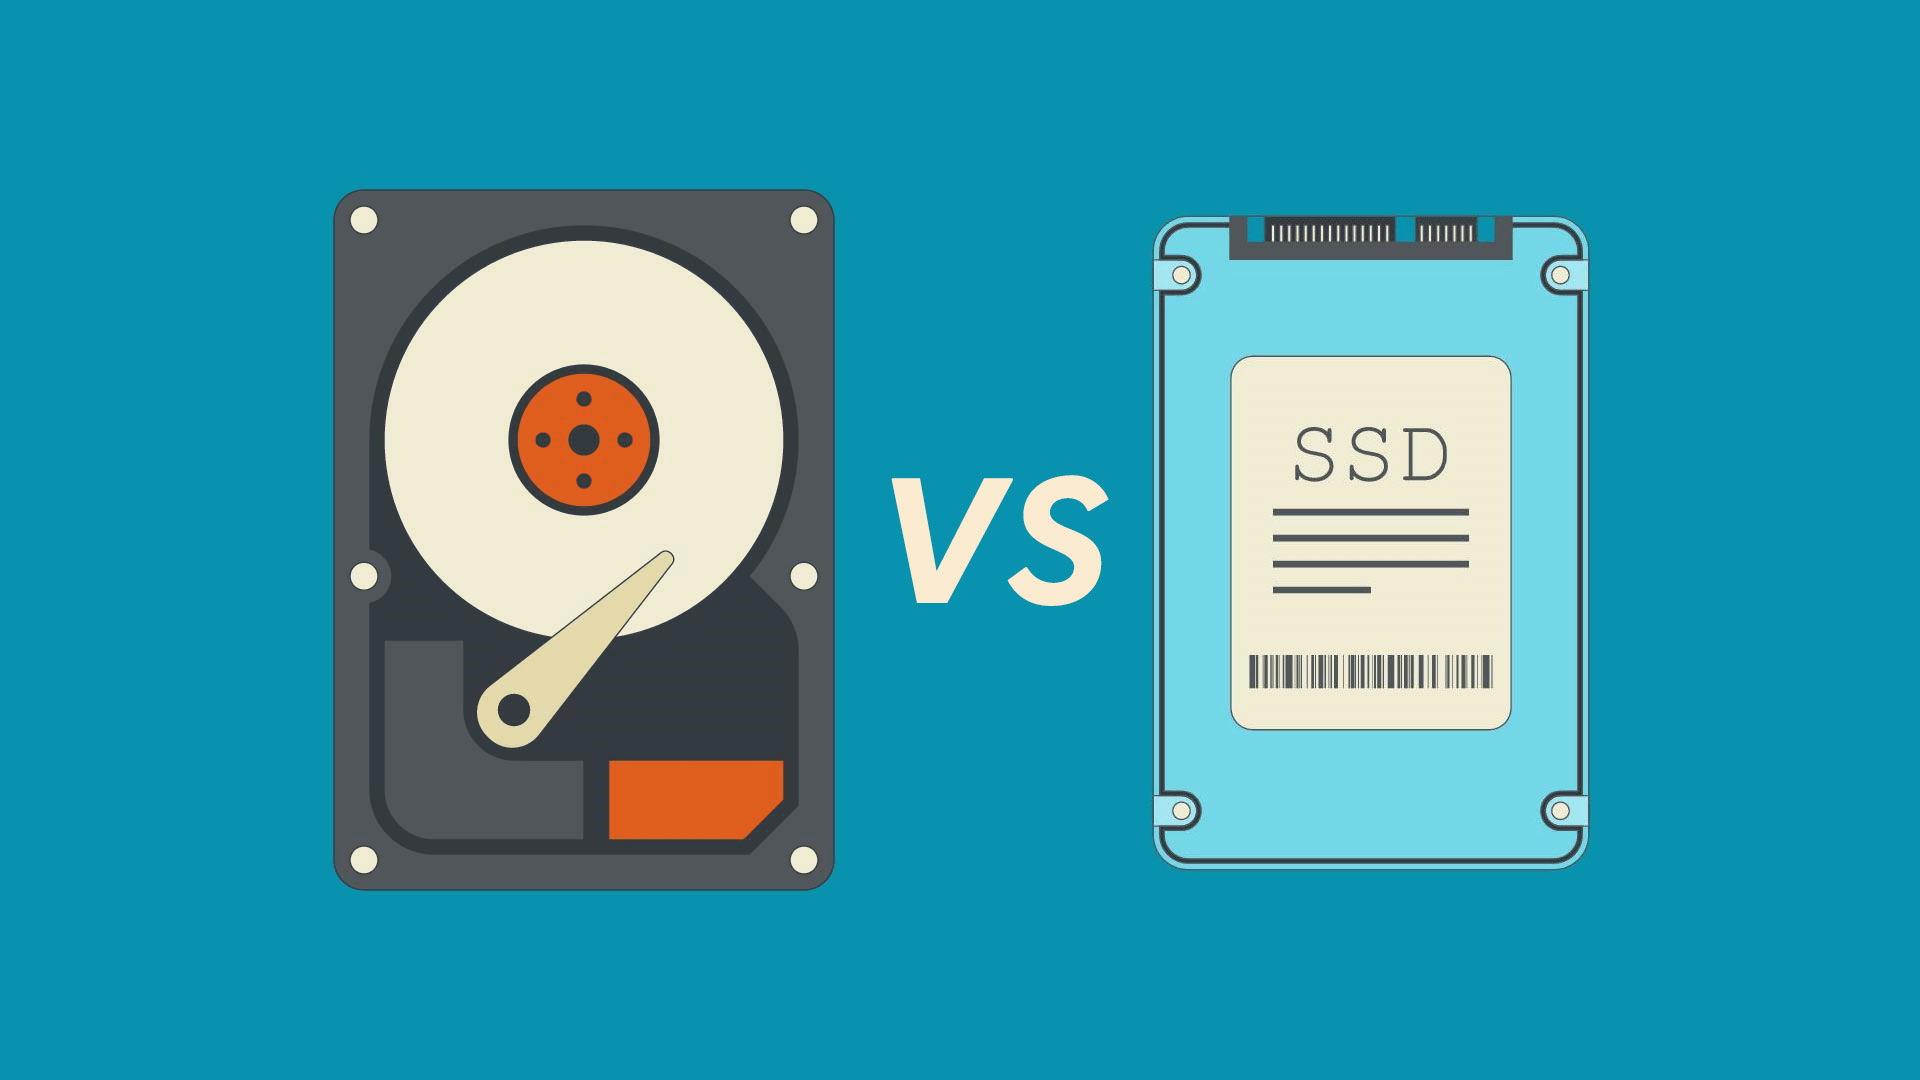 Hdd Vs Ssd Which One Is Better • Atulhost 9586